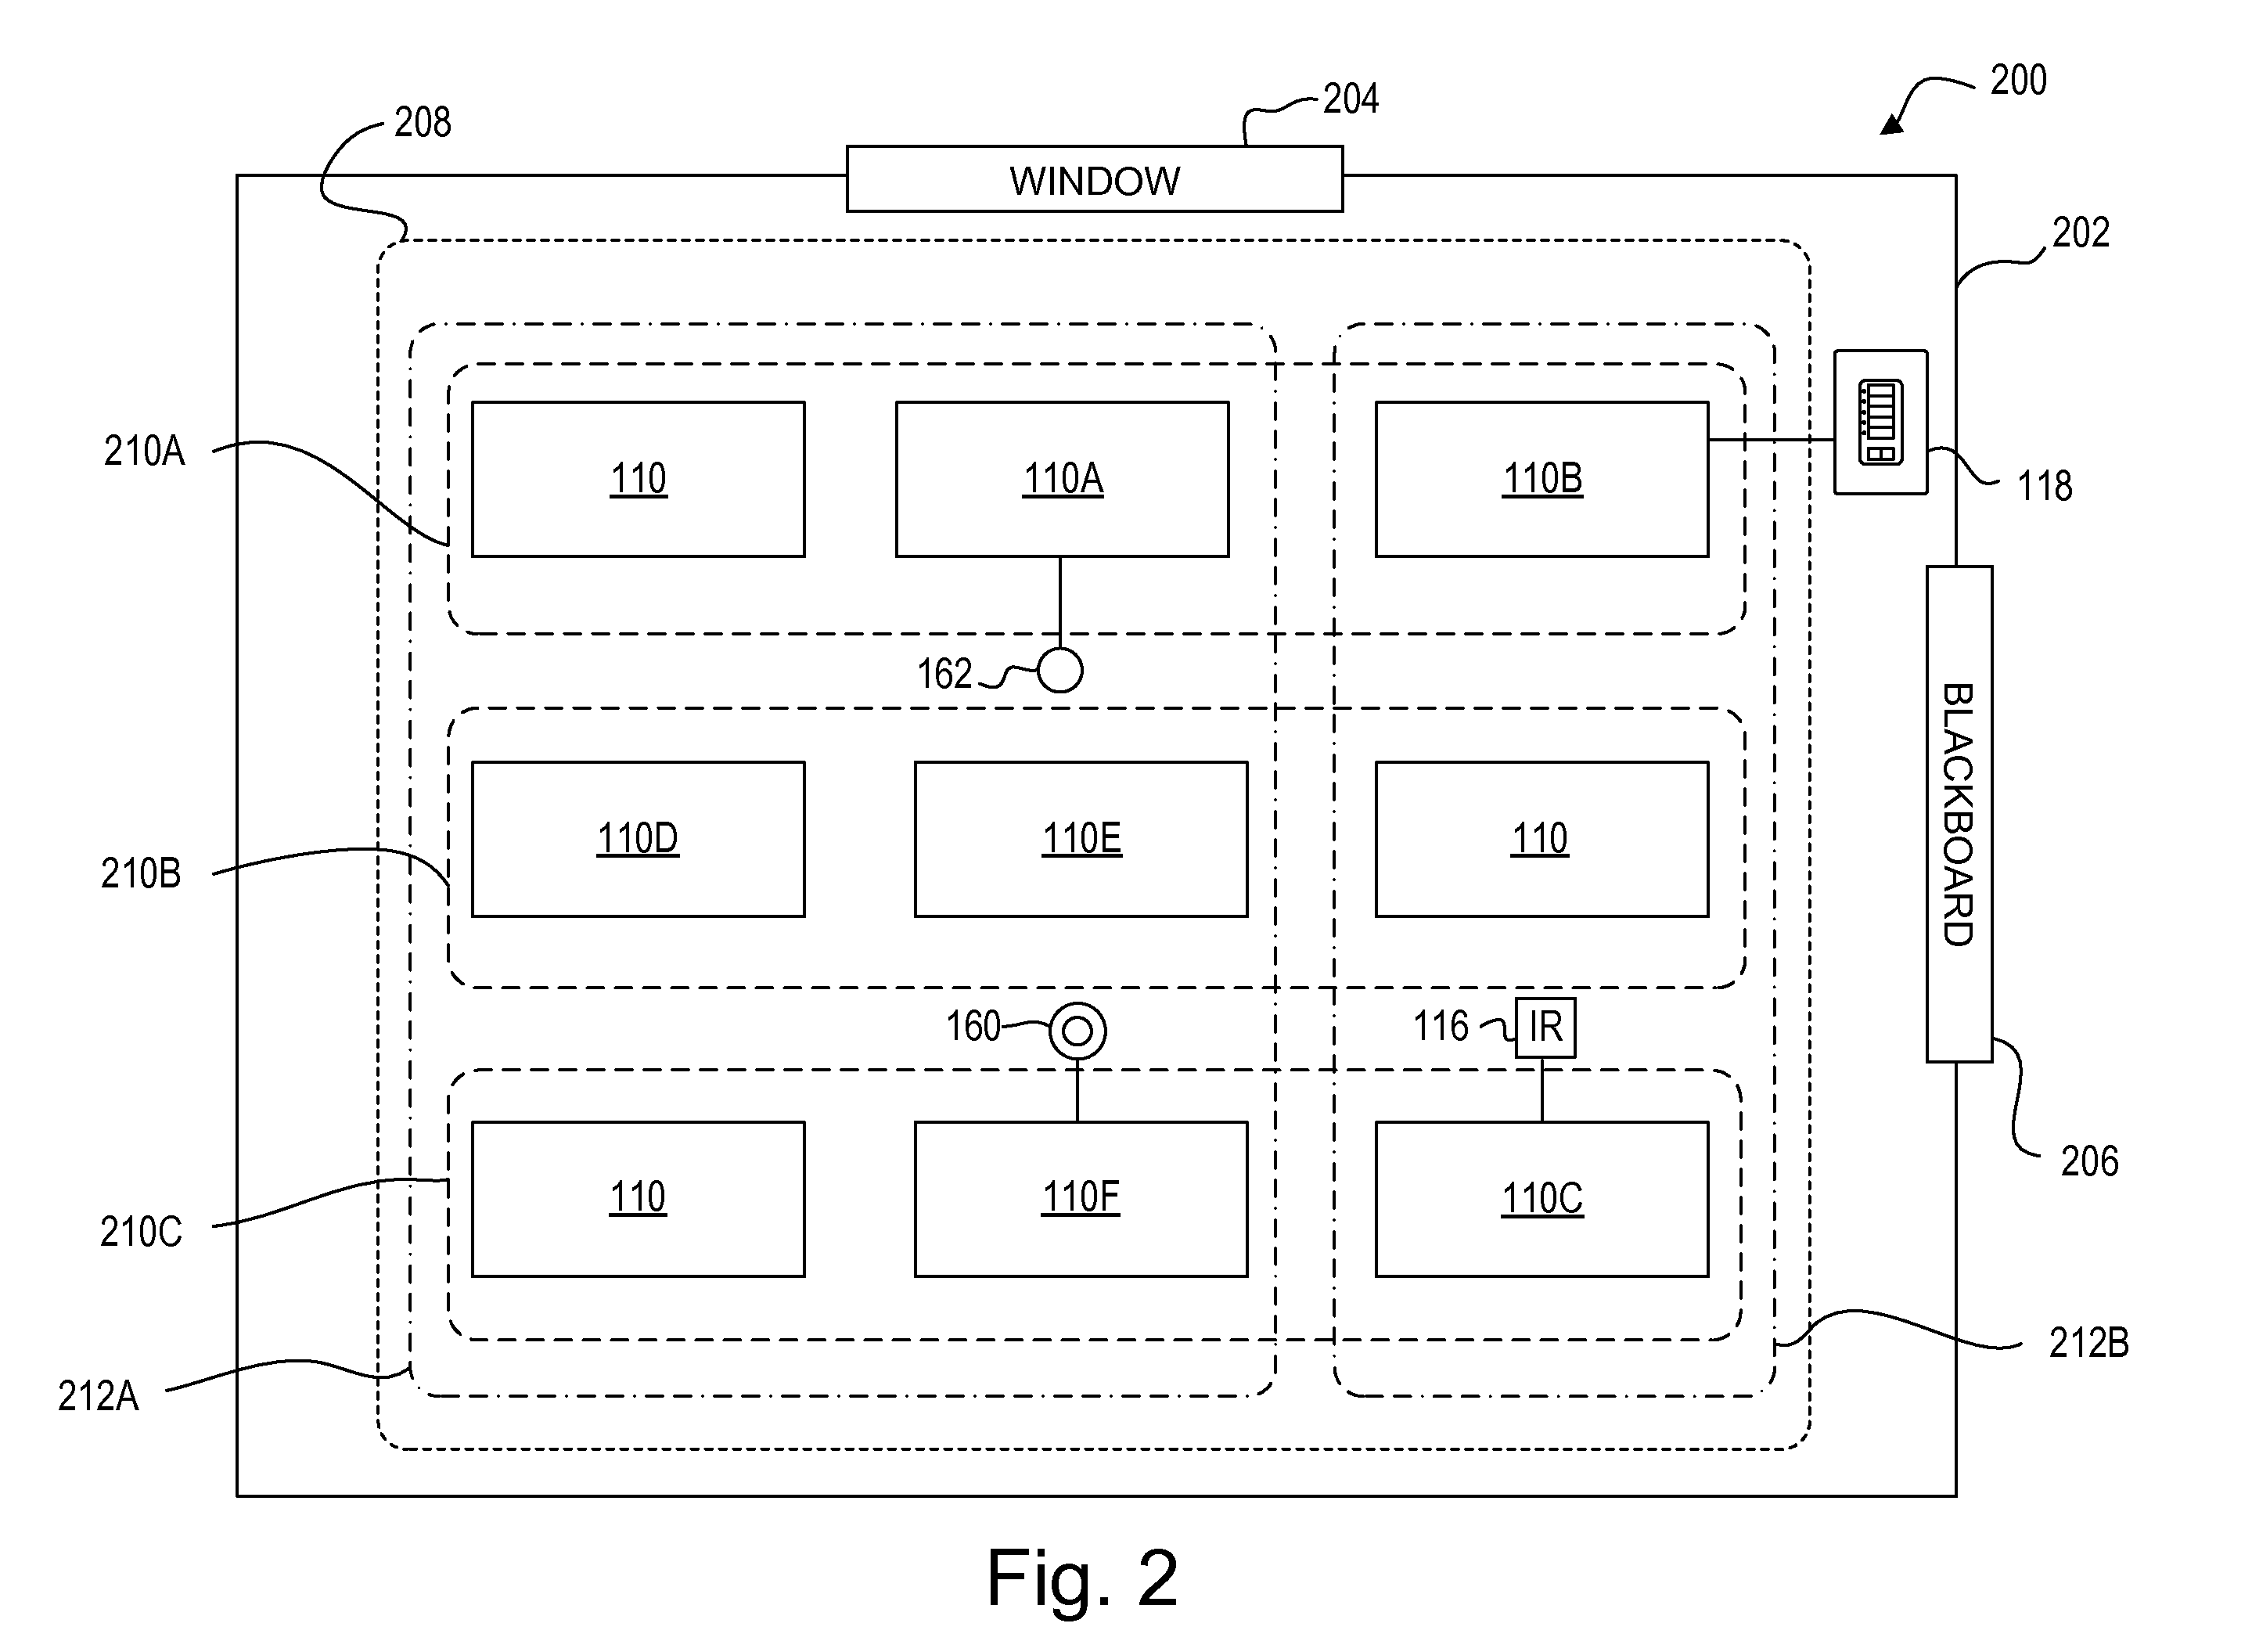 Method of Semi-Automatic Ballast Replacement